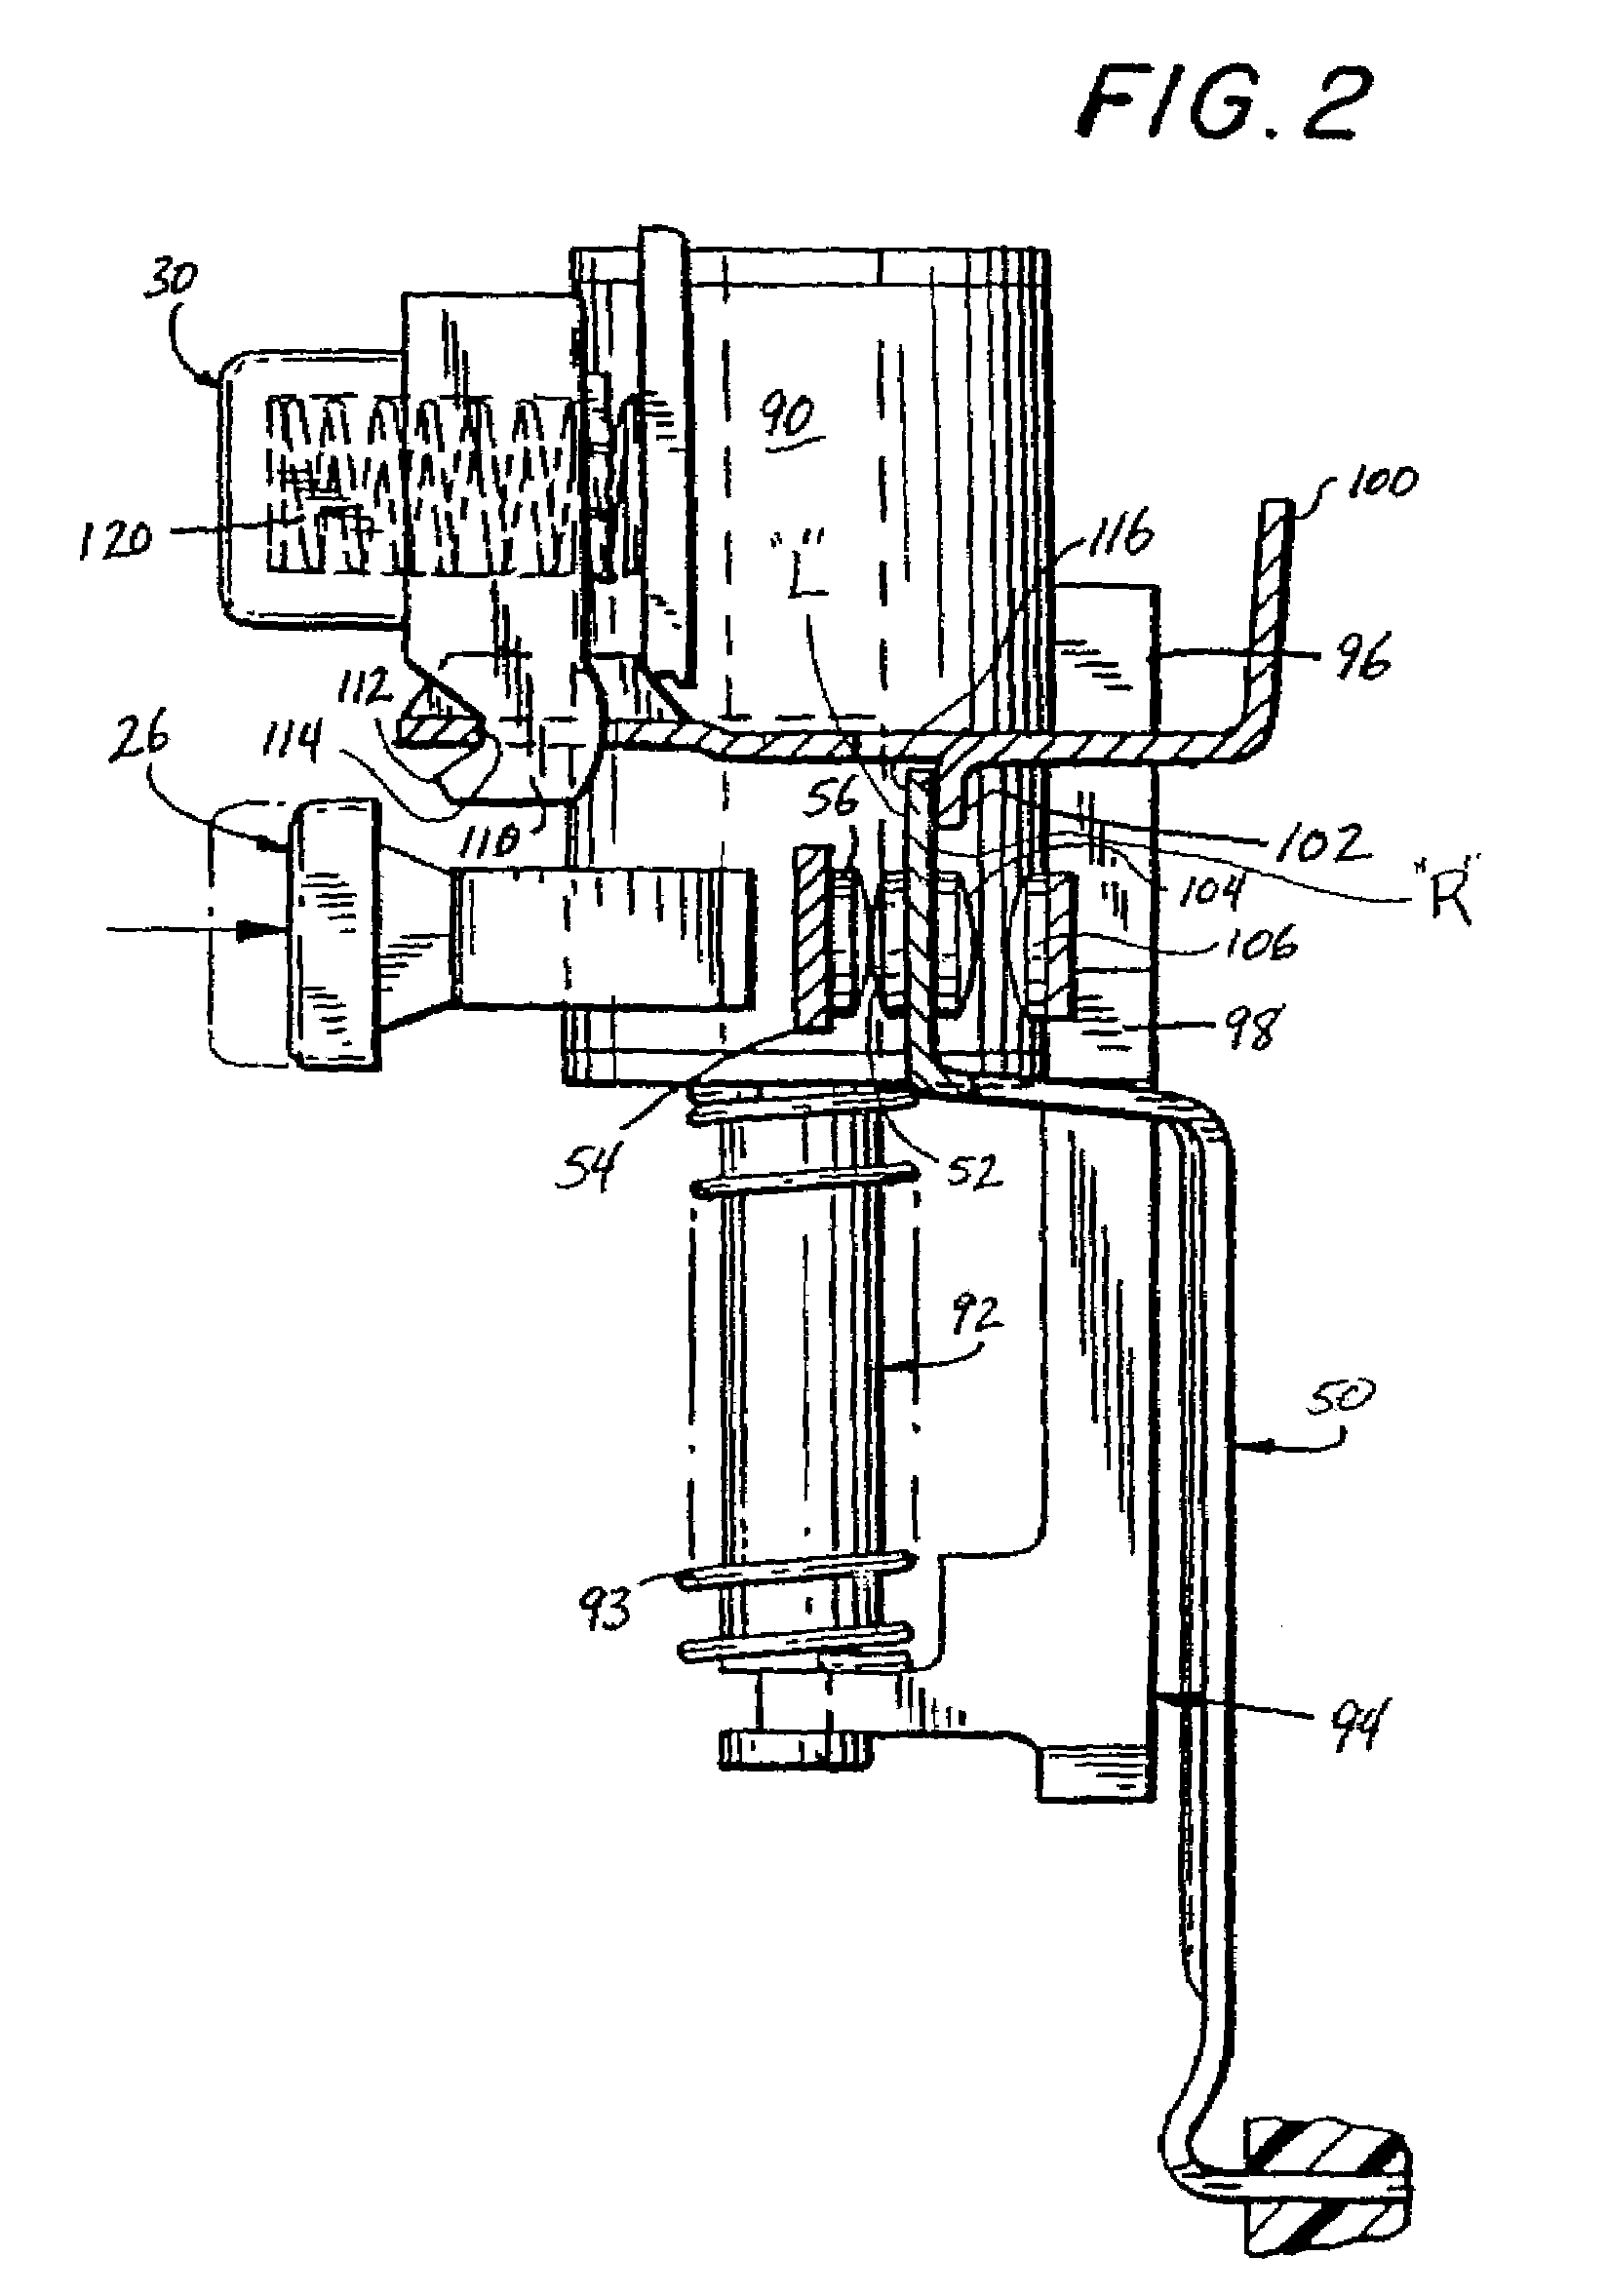 Method of distribution of a circuit interrupting device with reset lockout and reverse wiring protection